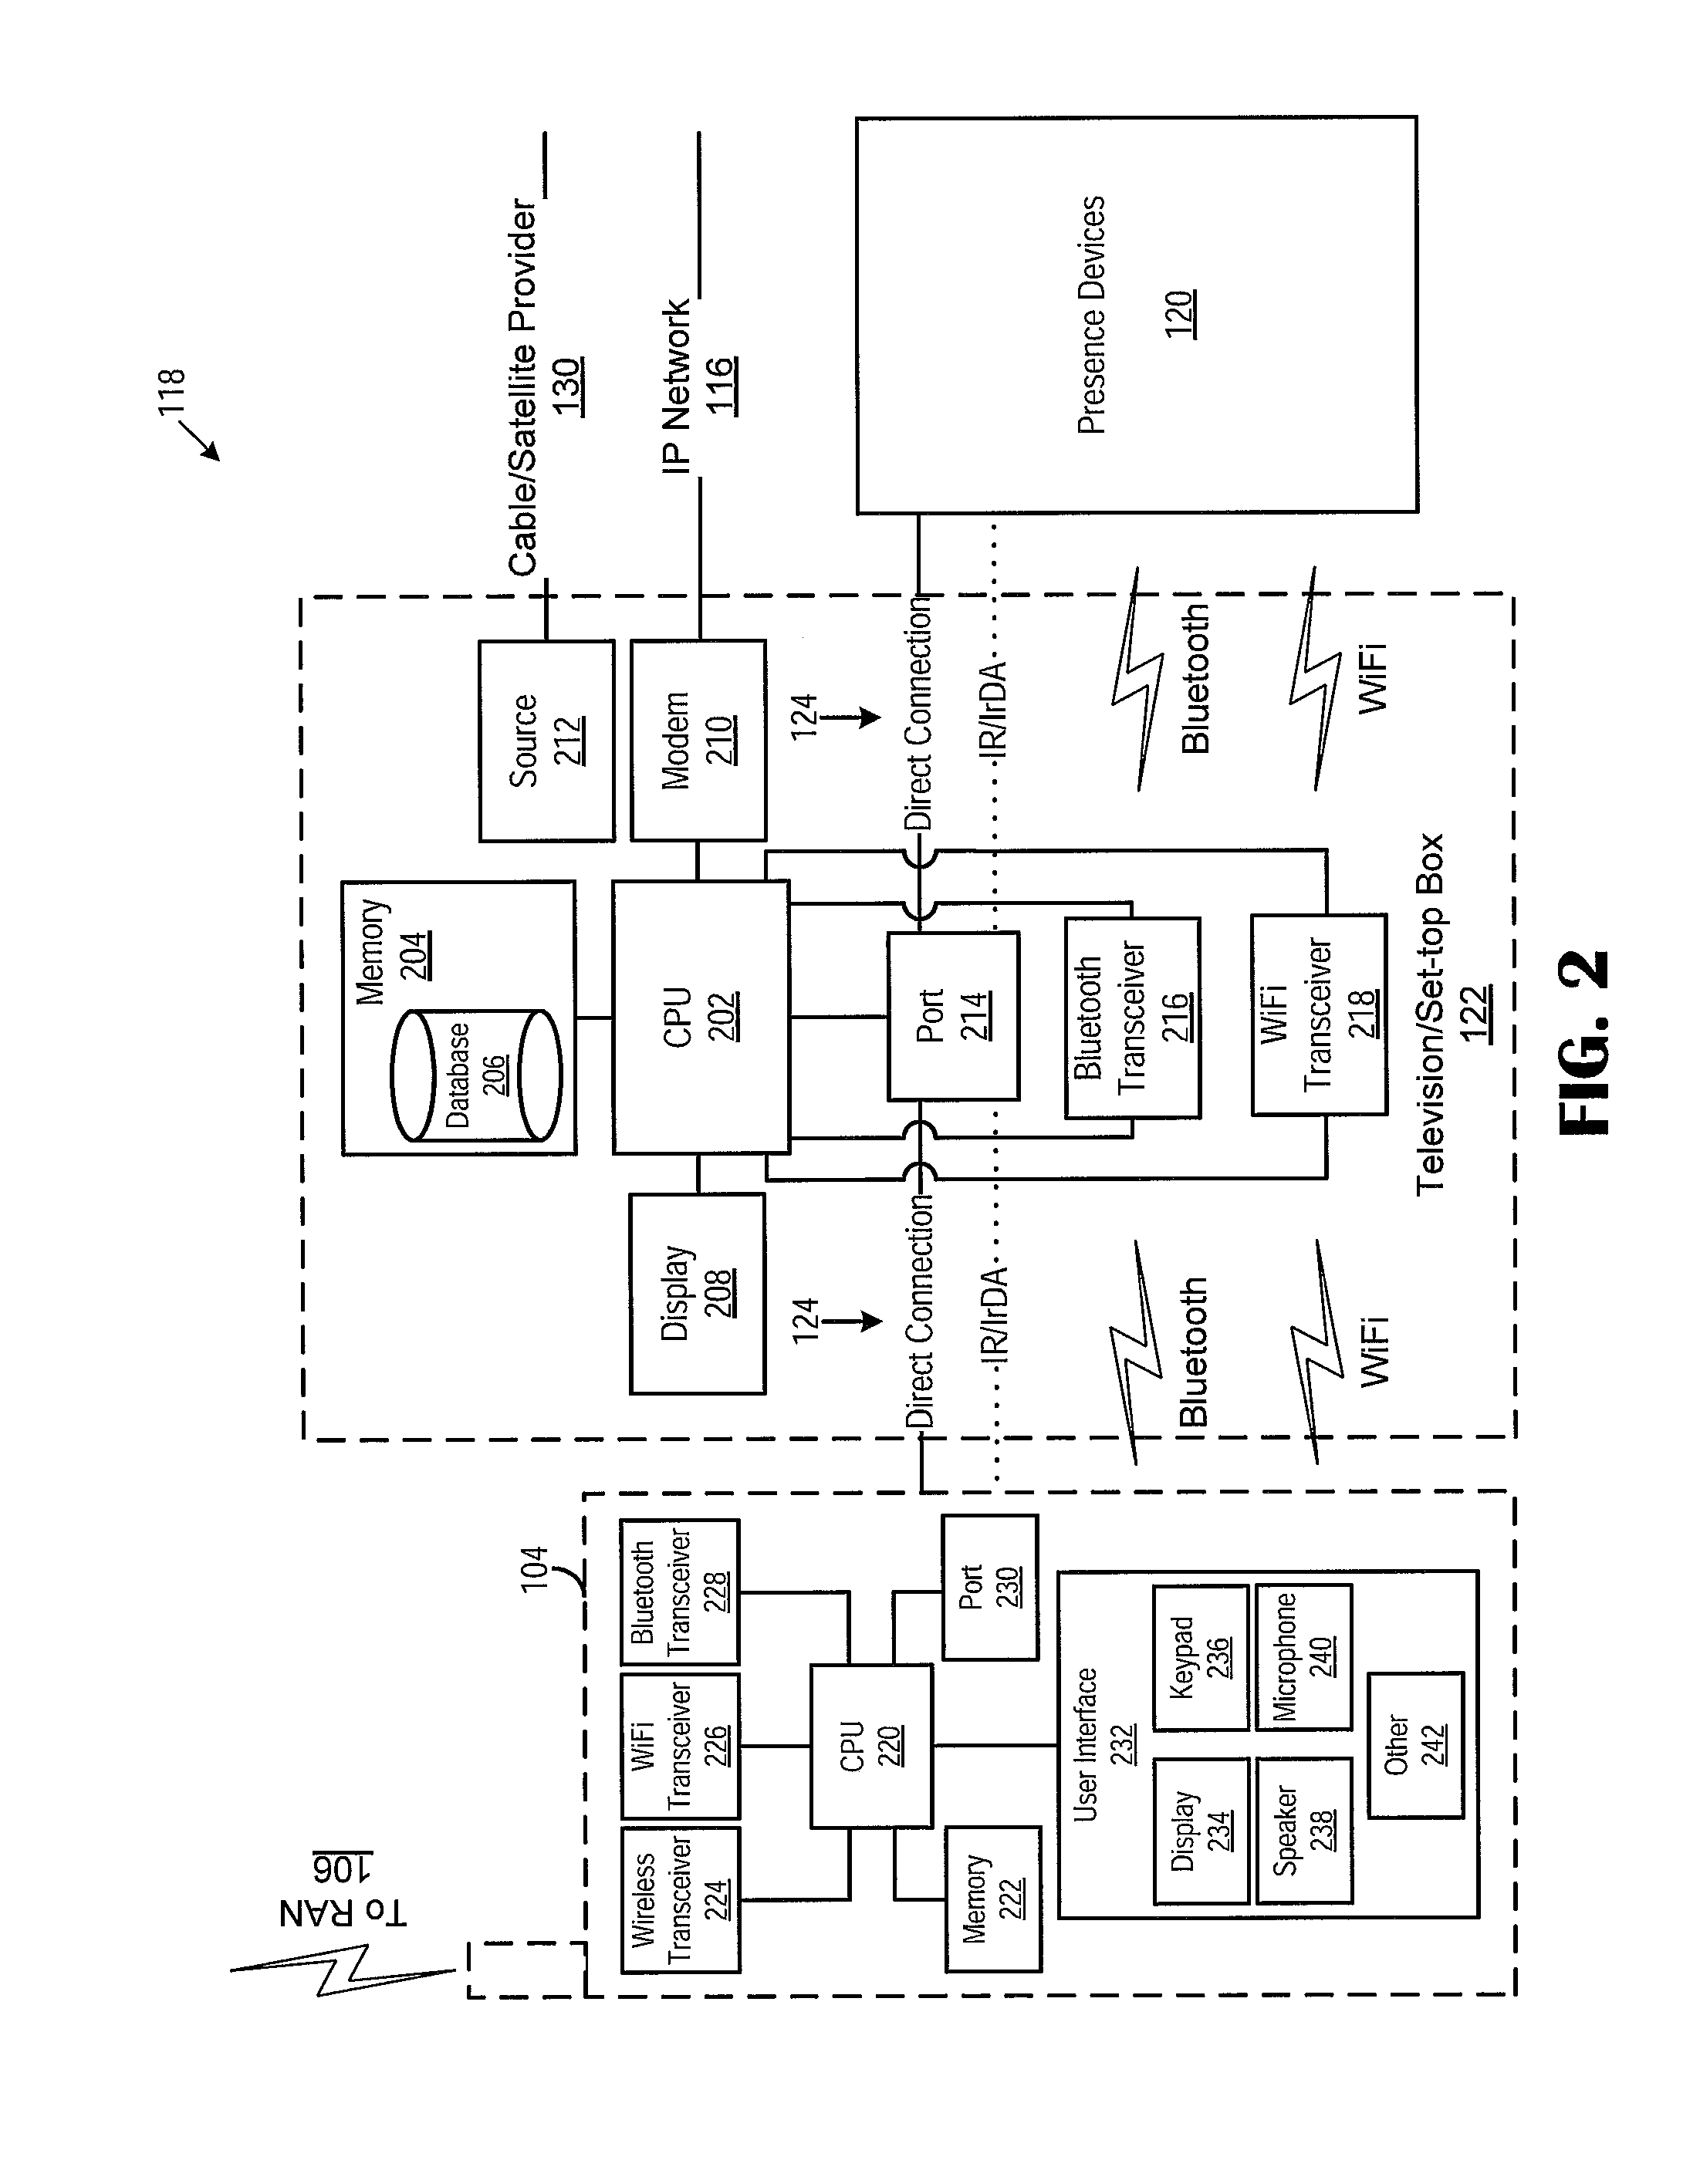 Systems and methods for updating user availability for wireless communication applications